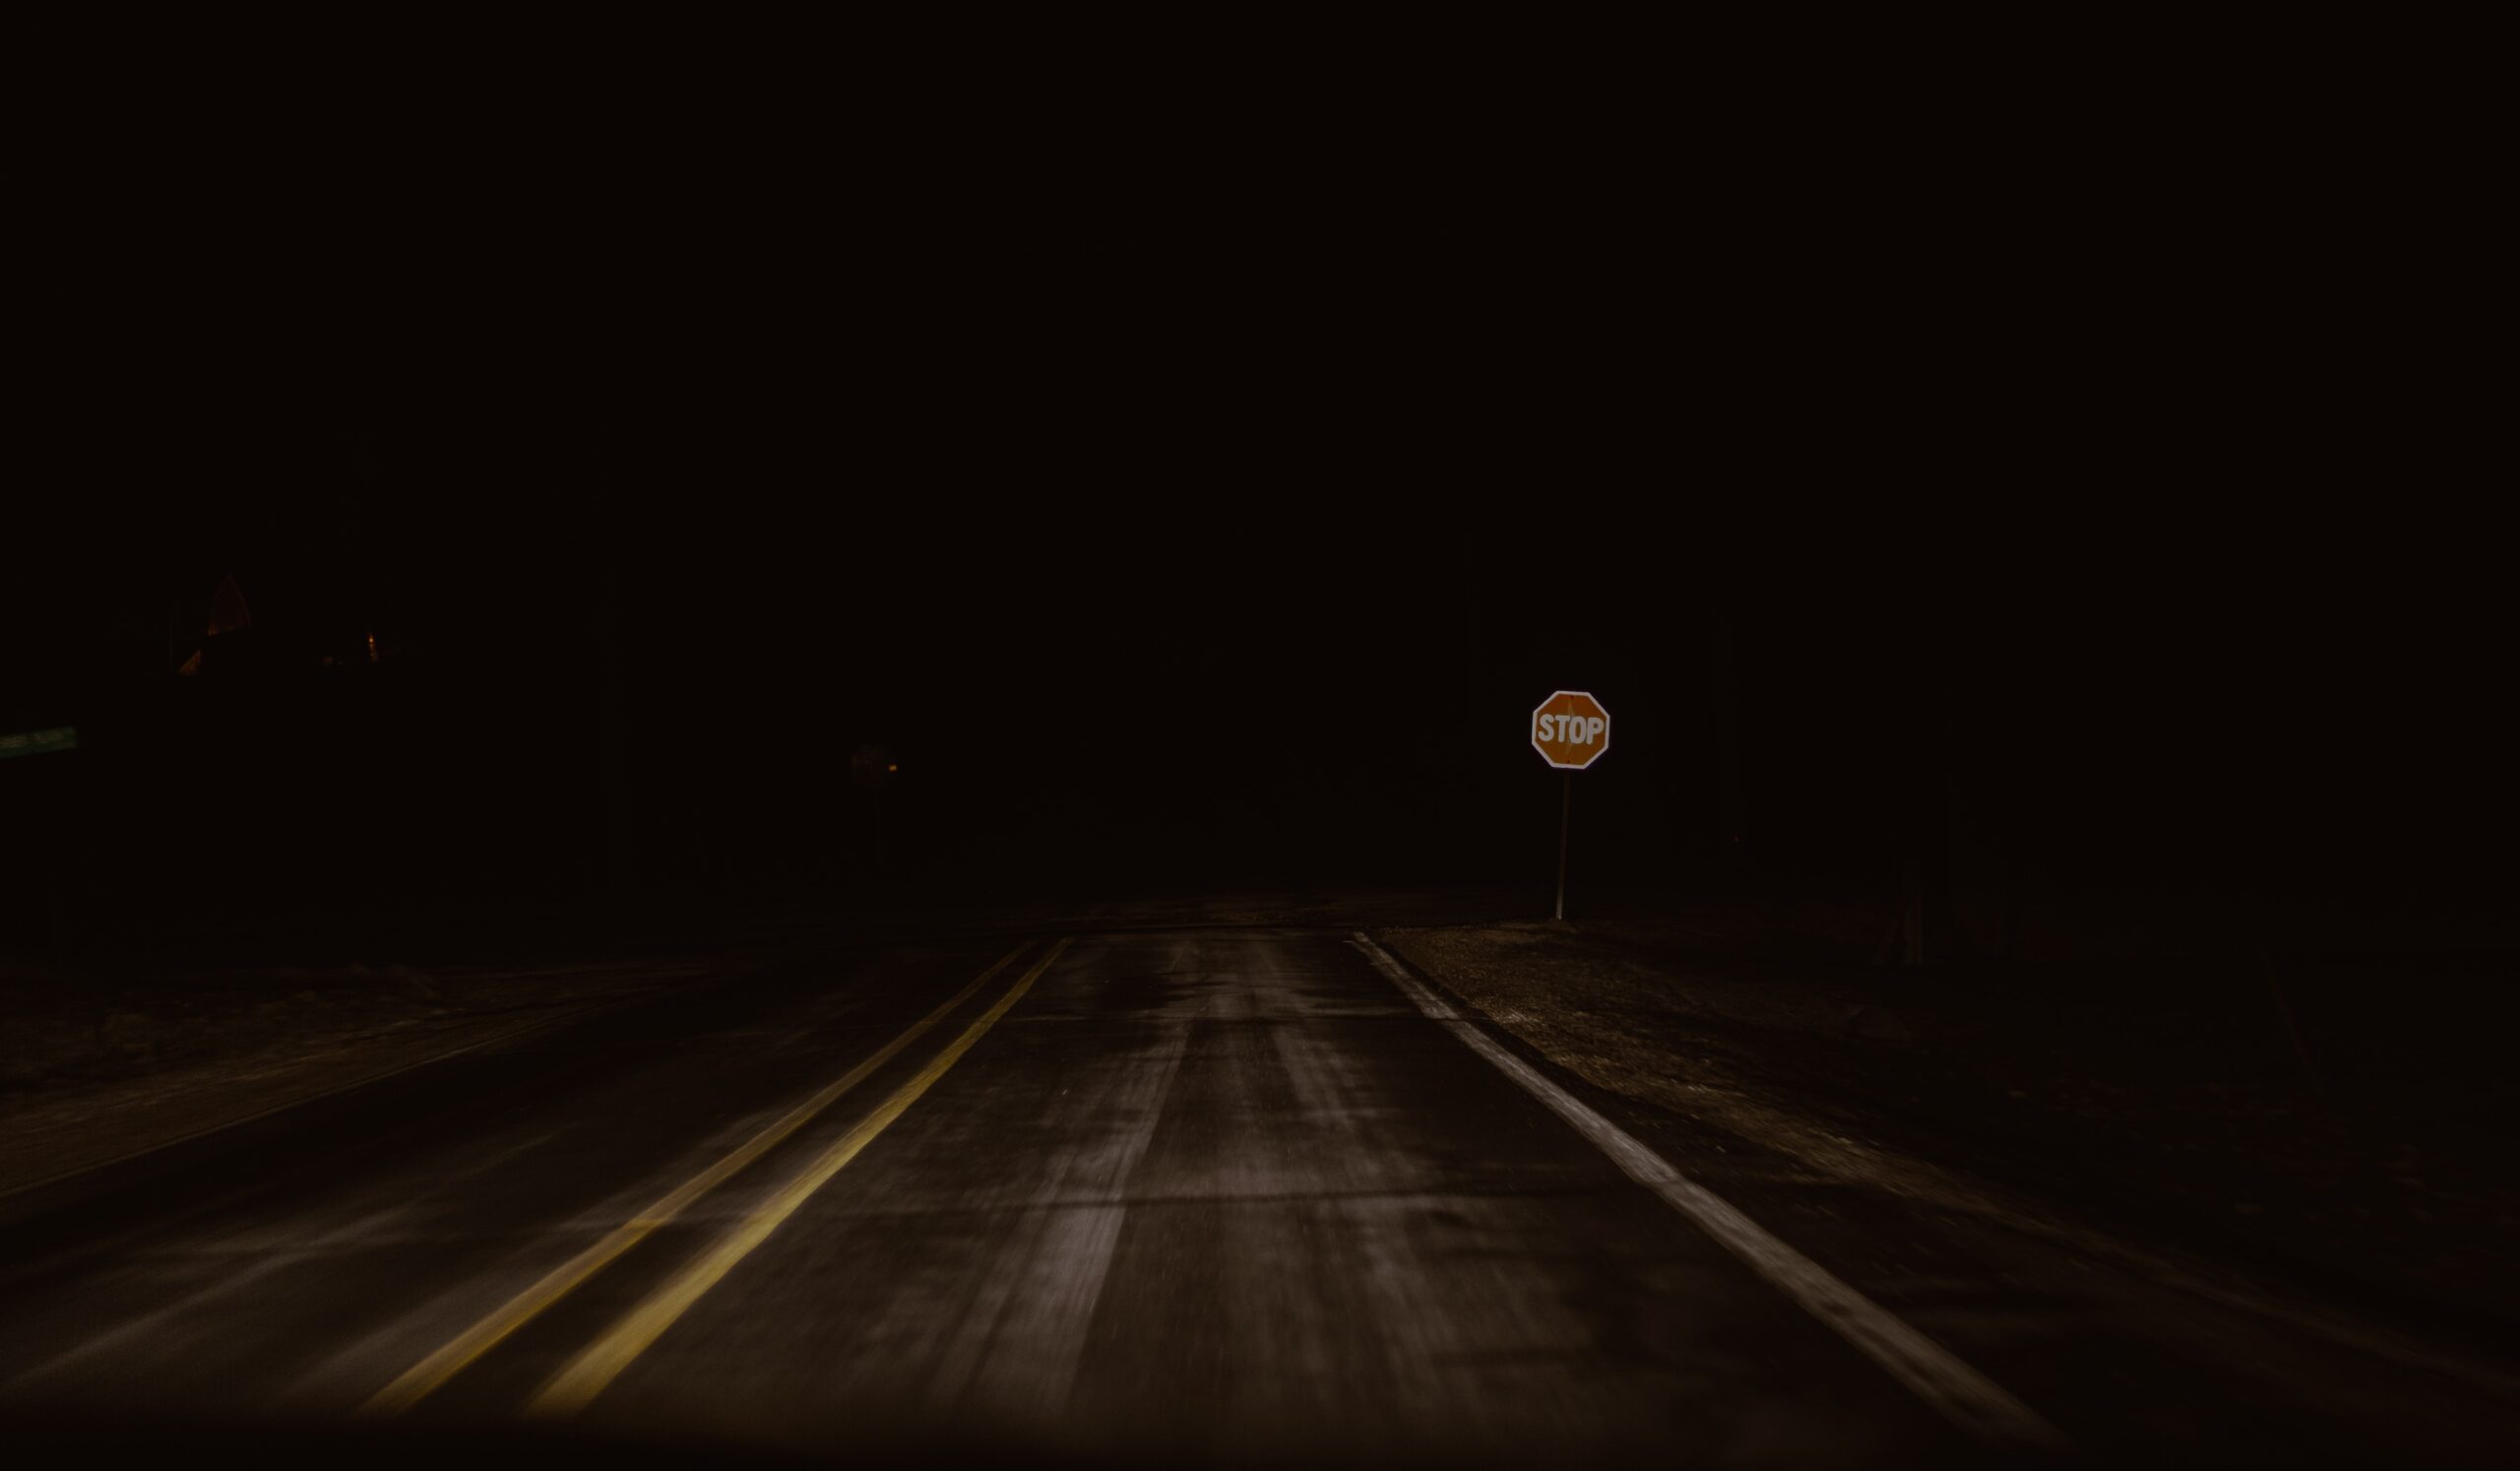 Road disappearing into dark night, with stop sign